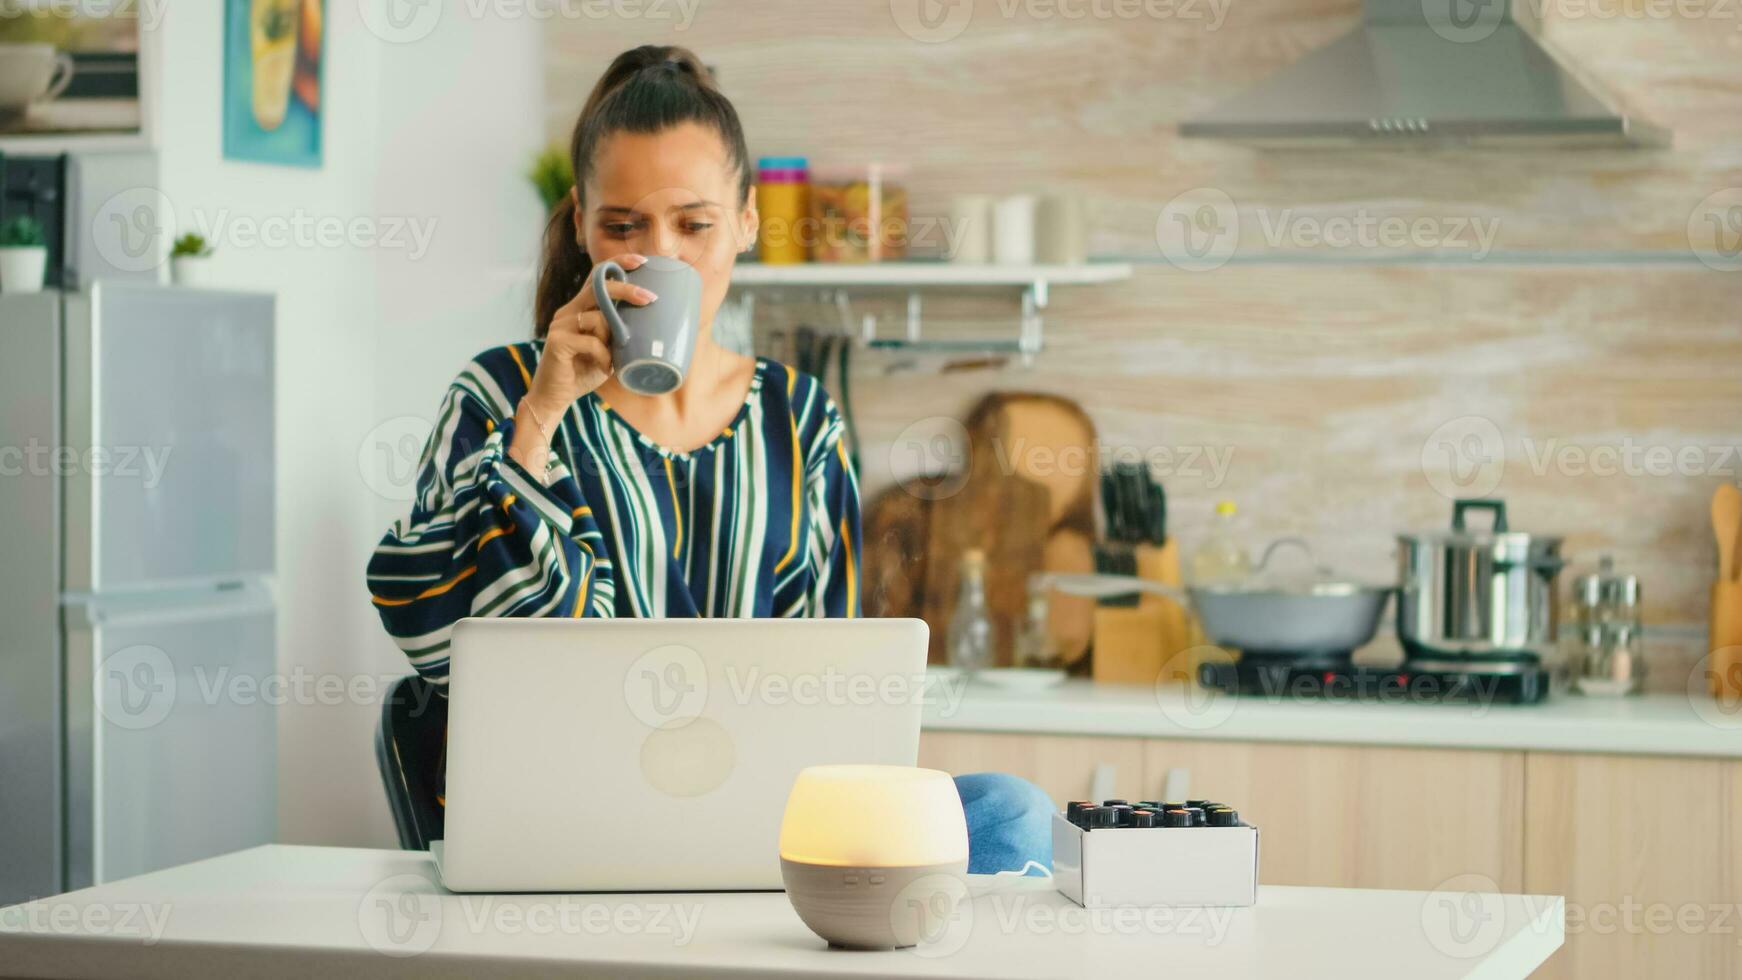 Drinking coffe and working with aromather apy essential oils diffuser in the kitchen. Aroma health essence, welness aromatherapy home spa fragrance tranquil theraphy, therapeutic steam, mental health treatment photo